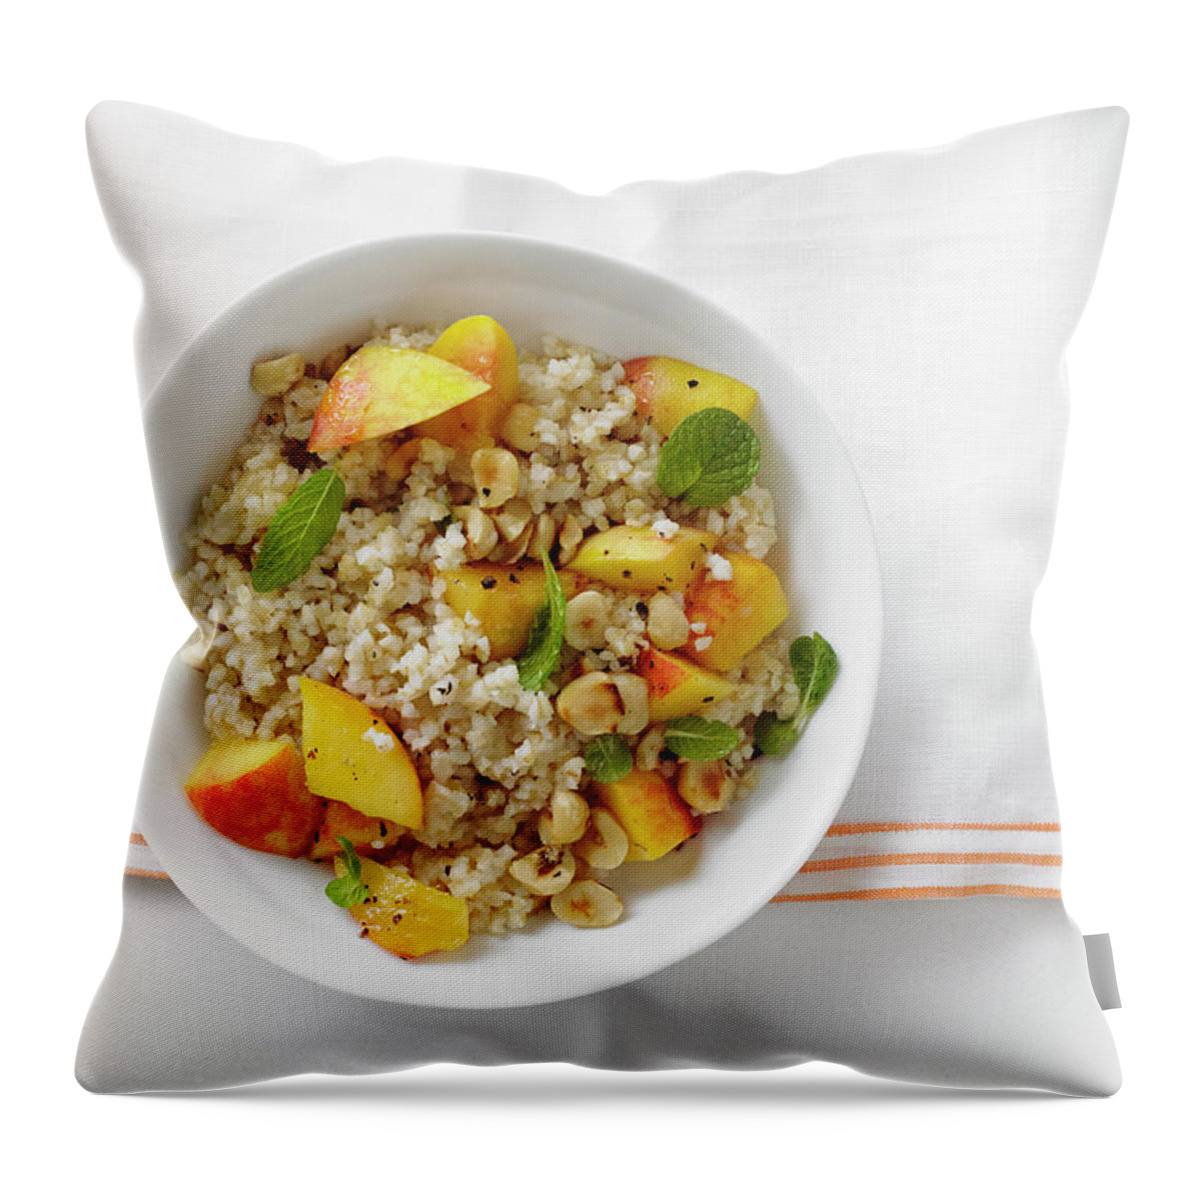 Temptation Throw Pillow featuring the photograph Minted Bulgur And Peach Salad by Iain Bagwell